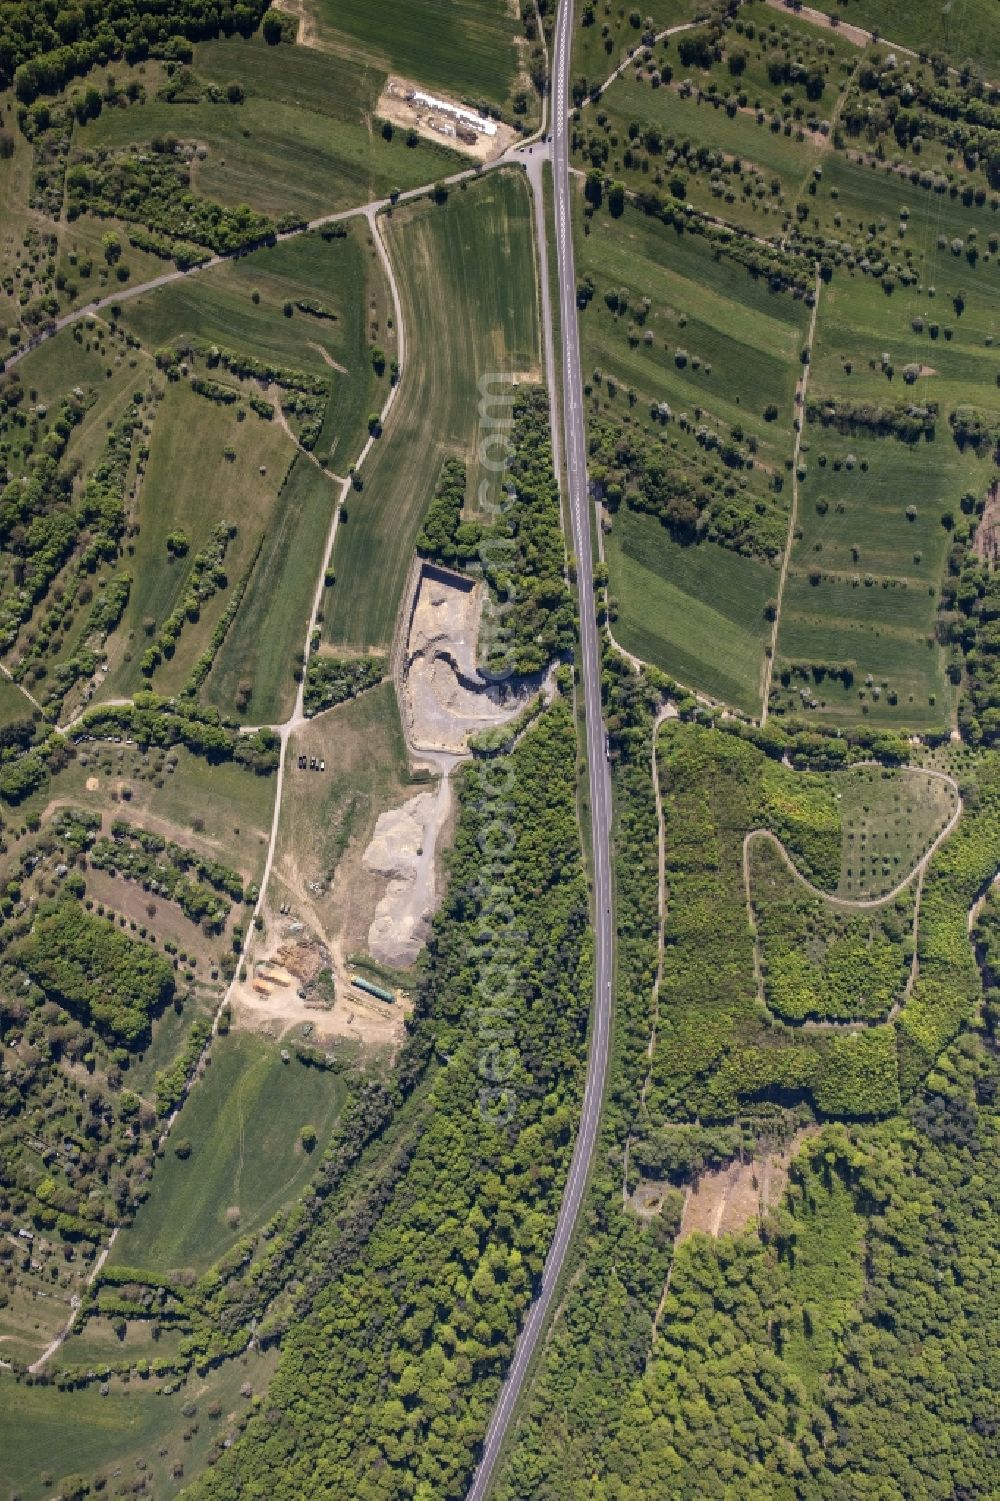 Kämpfelbach from the bird's eye view: Site and tailings area of the gravel mining in the district Ersingen in Kaempfelbach in the state Baden-Wuerttemberg, Germany